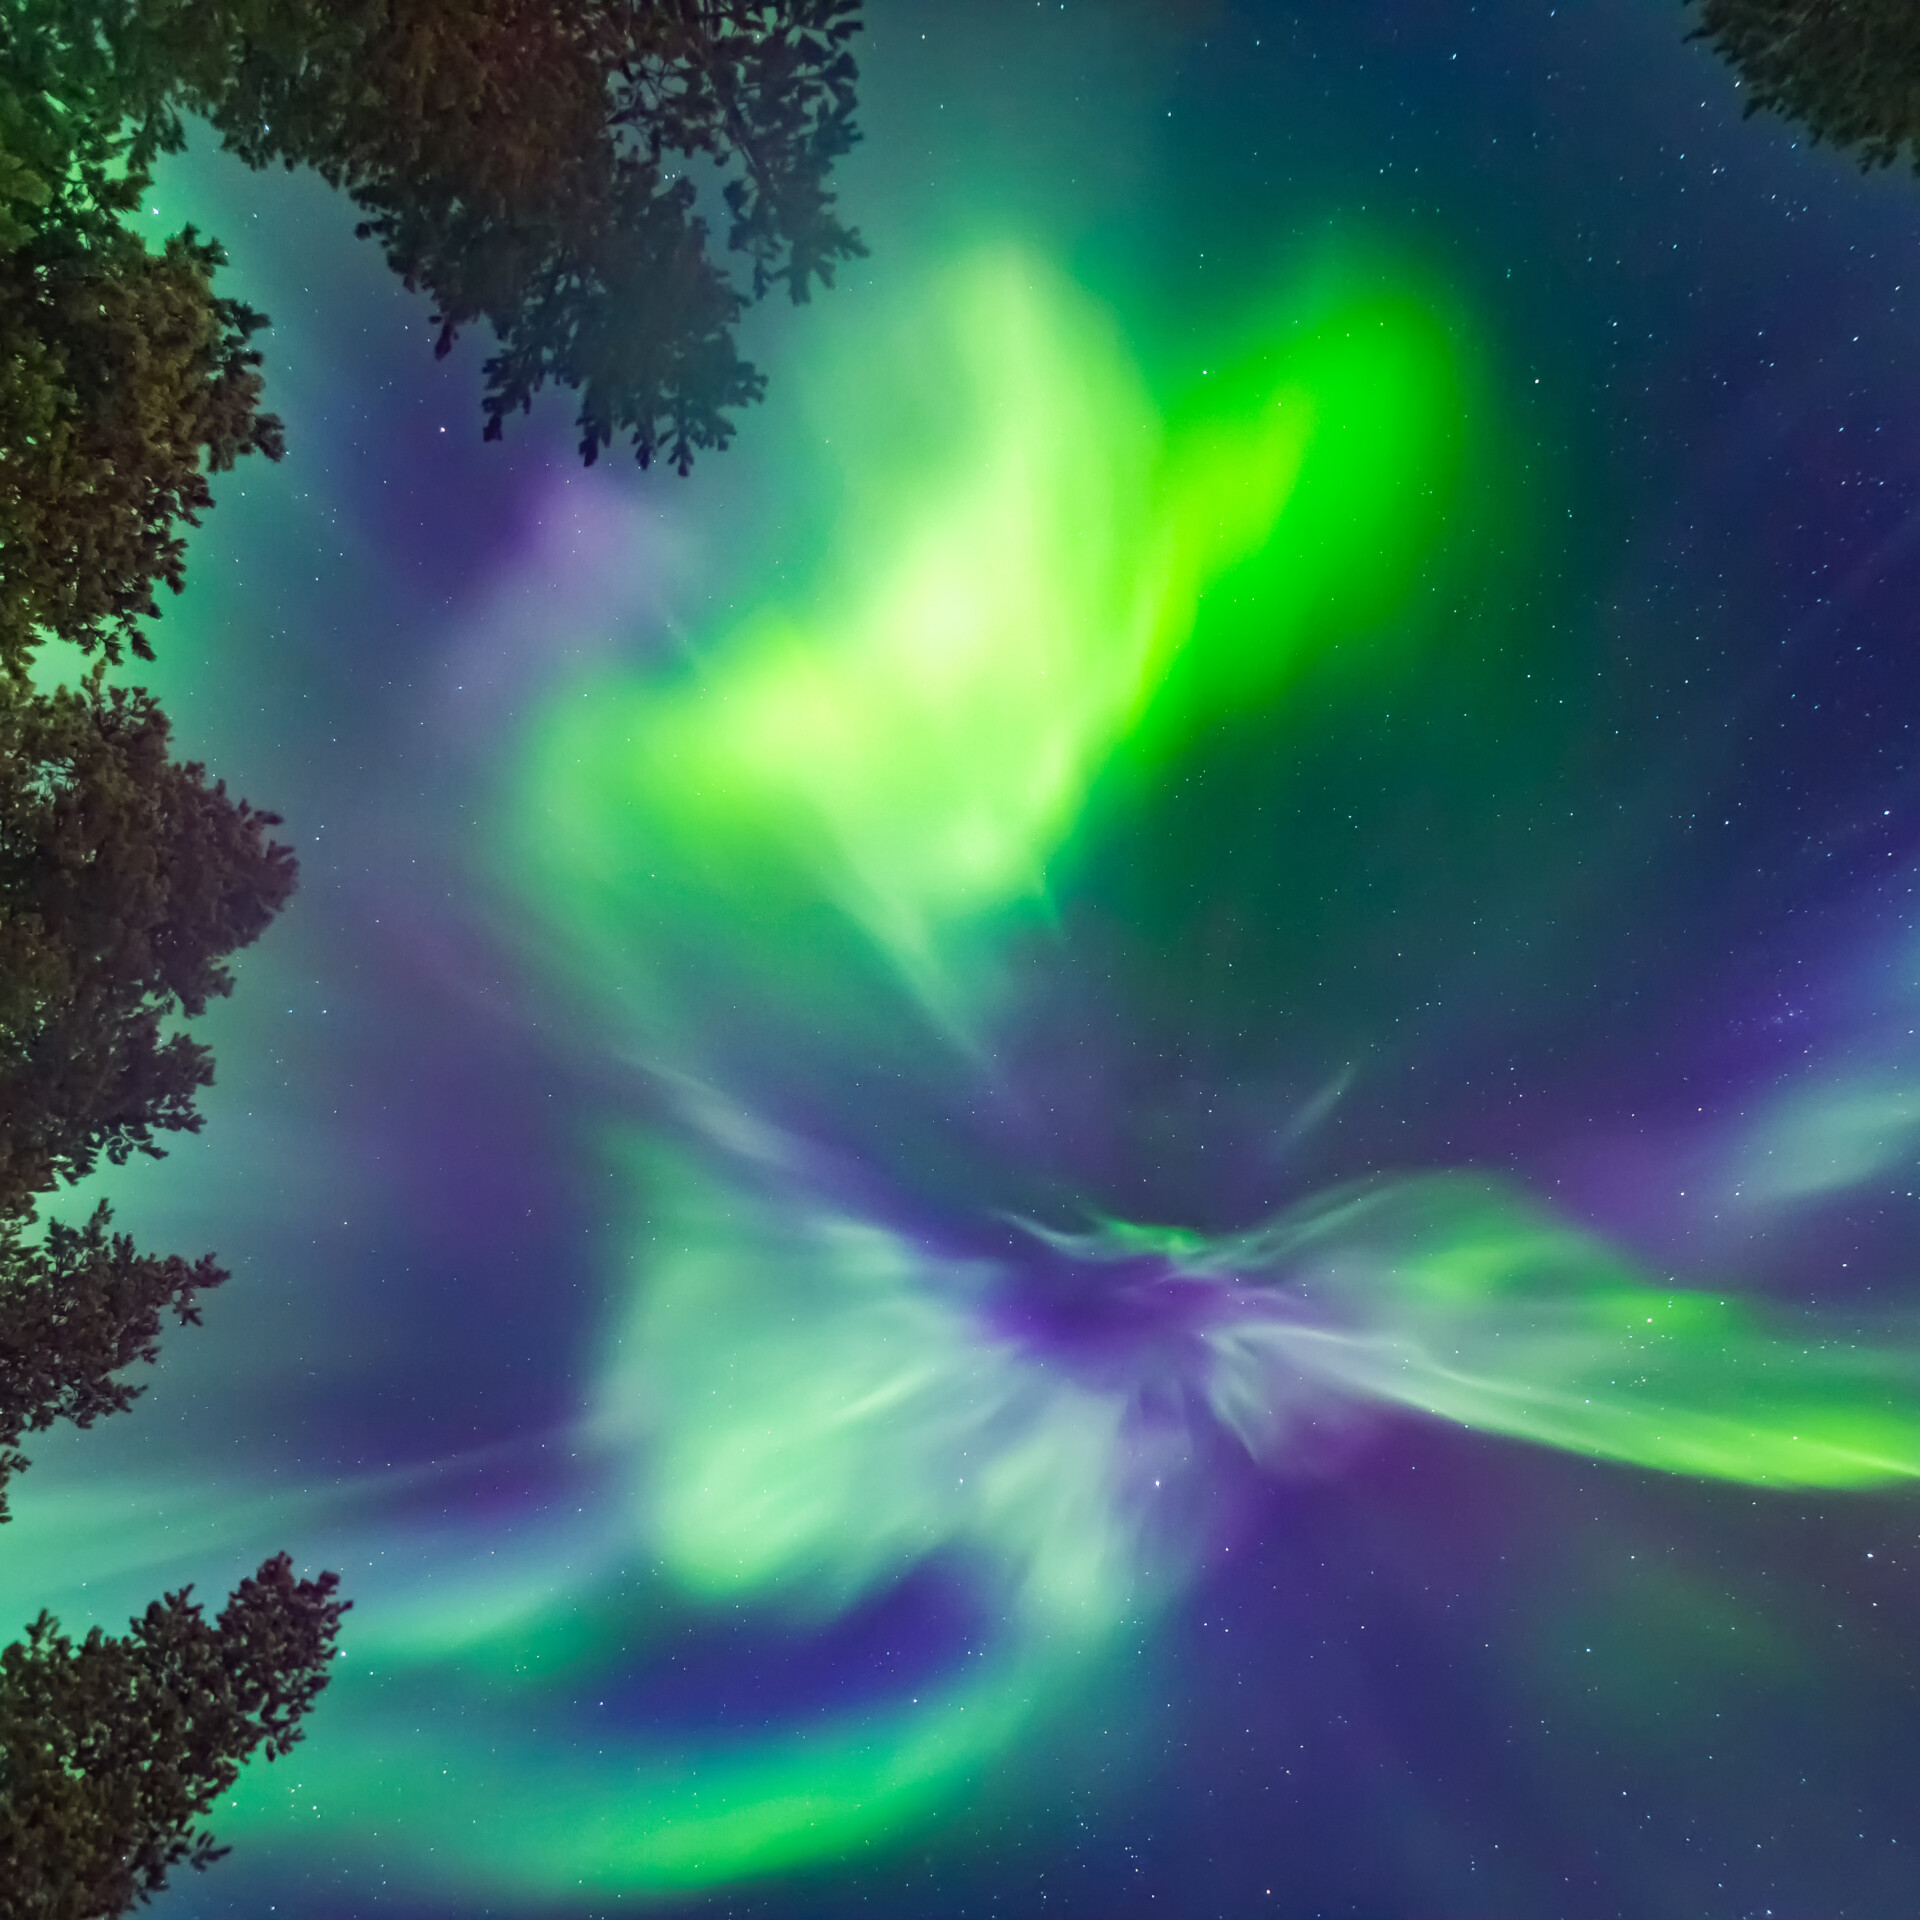 Aurora photographed from below